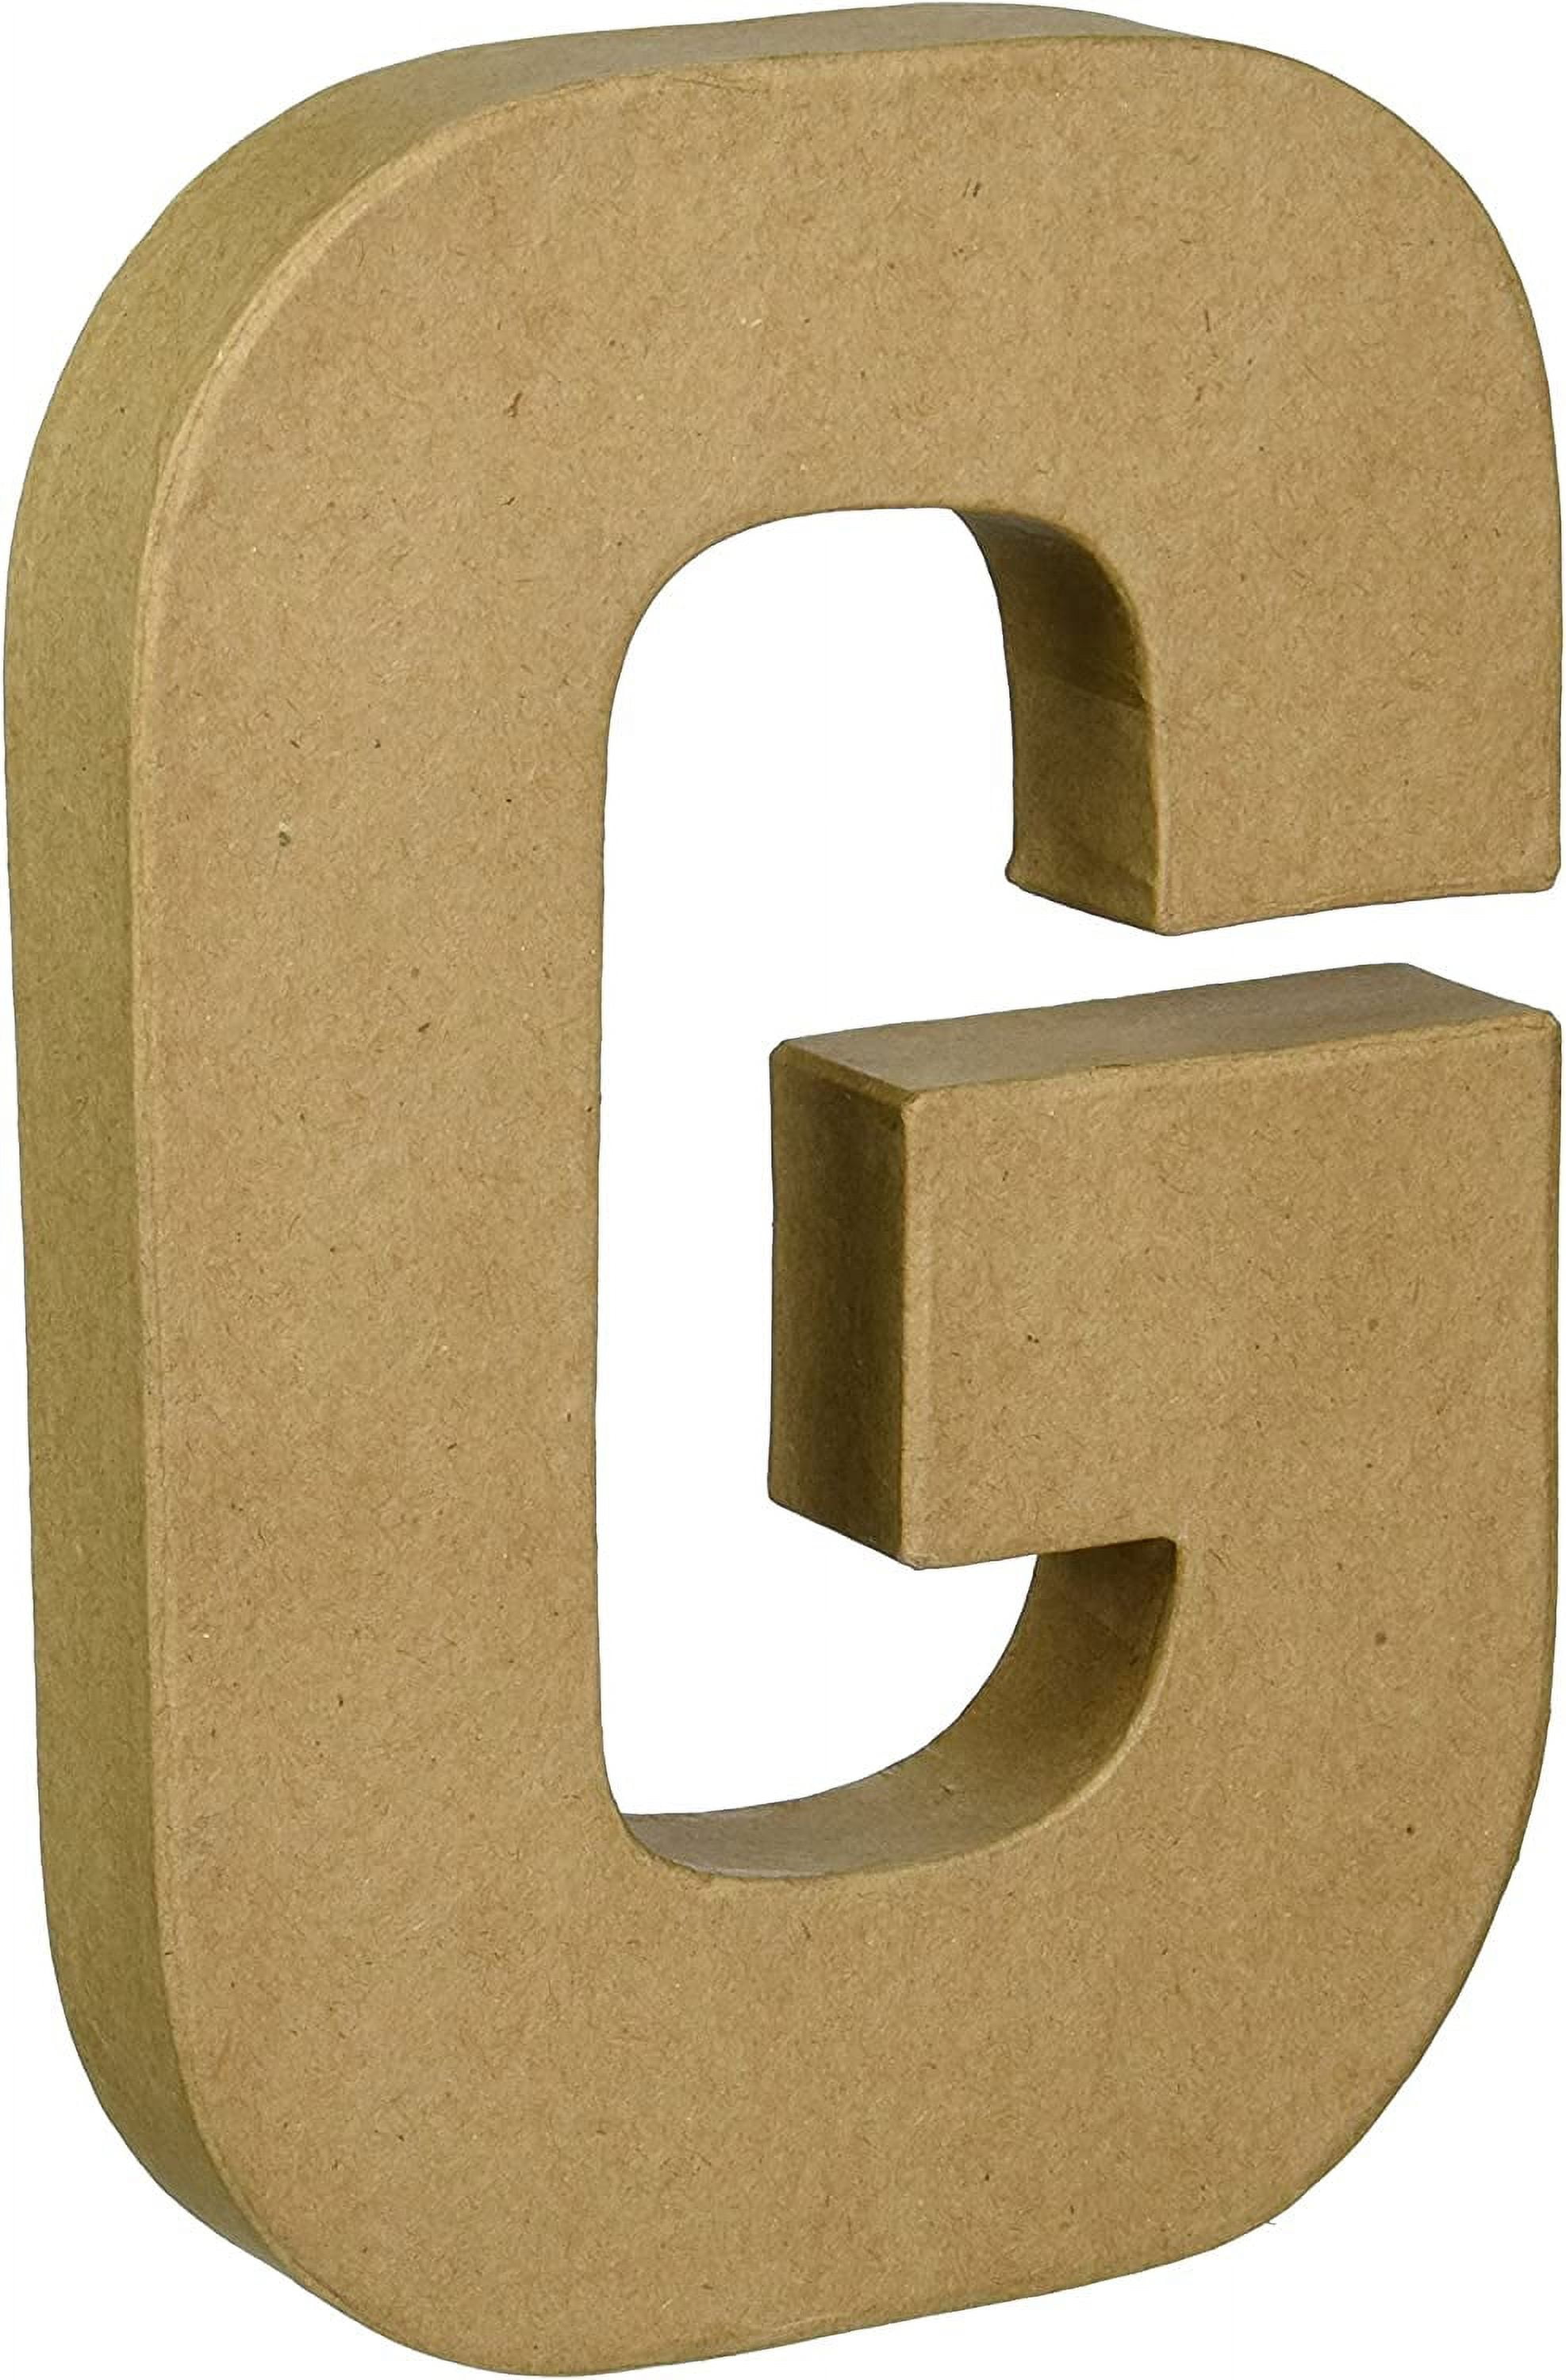 Letters and numbers of paper mache, cartons